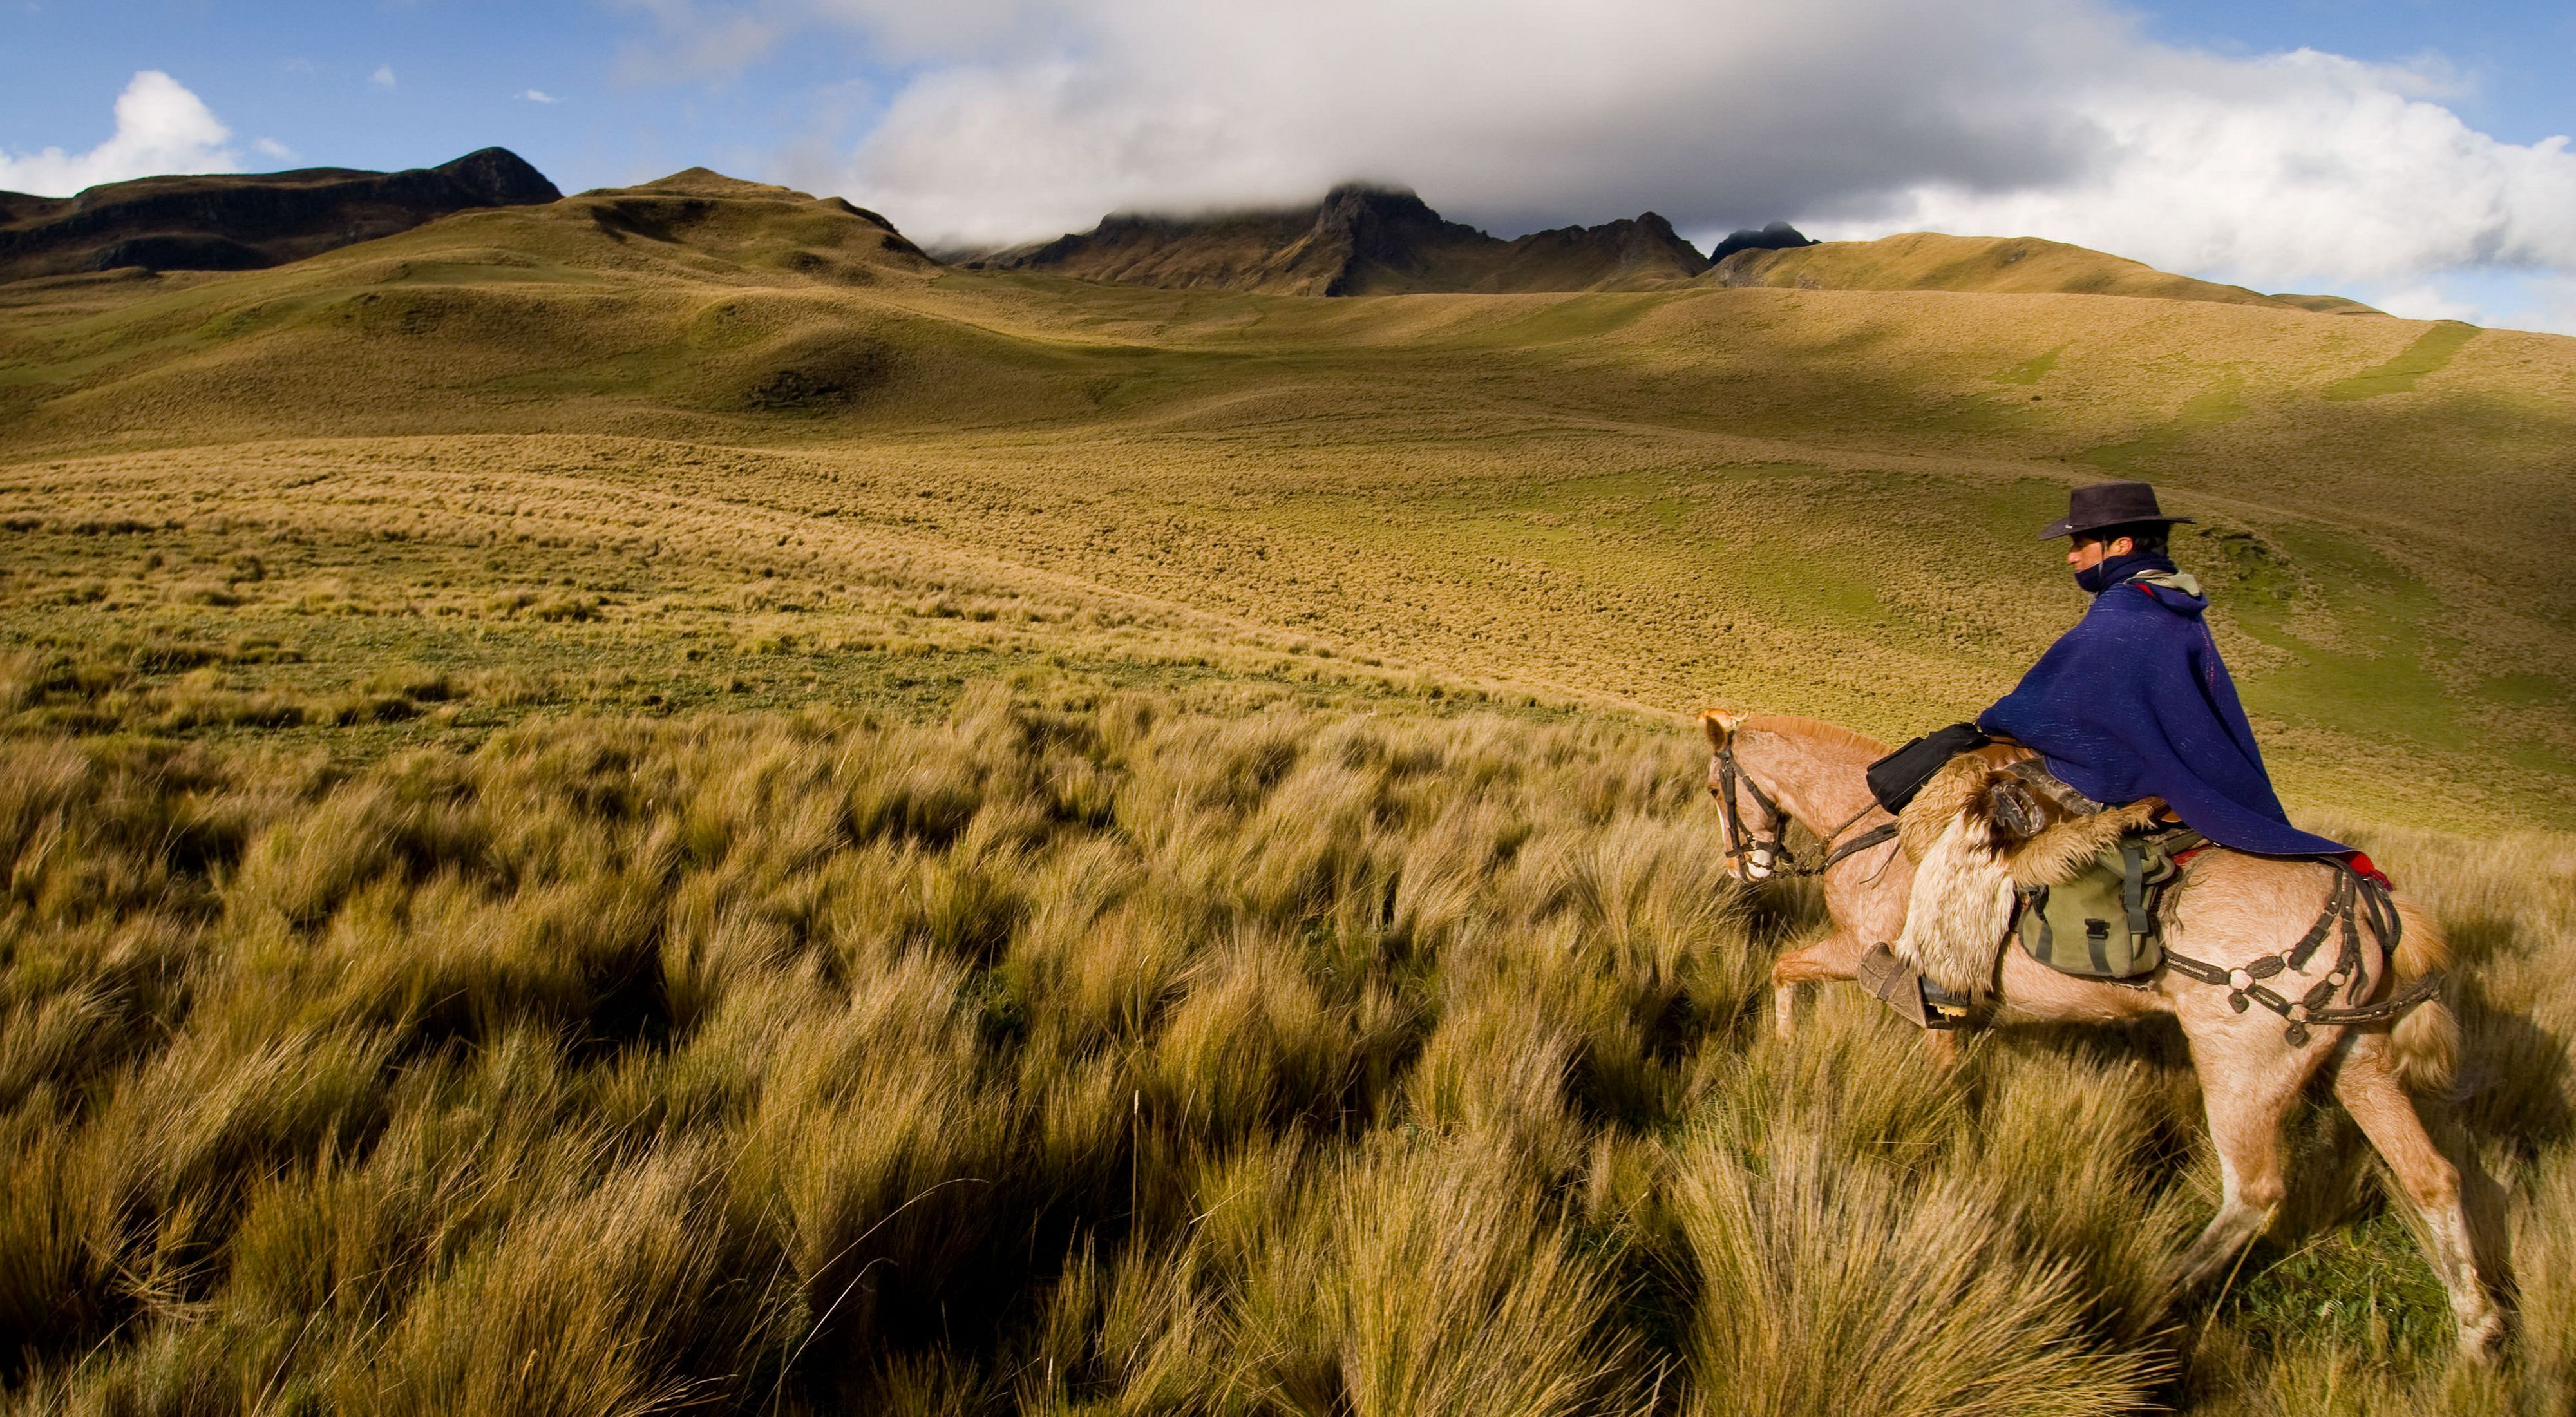 Local ecotourism guide, Celso Changoluisa, rides through high Andean grasslands in the Cotopaxi National Park buffer Zone in Ecuador, South America. Celso works at the Santa Rita hacienda, owned and operated as an eco-tourist business by Jorge Perez, who works with the Conservancy and other landowners to improve cattle ranching practices and preserve the region.  